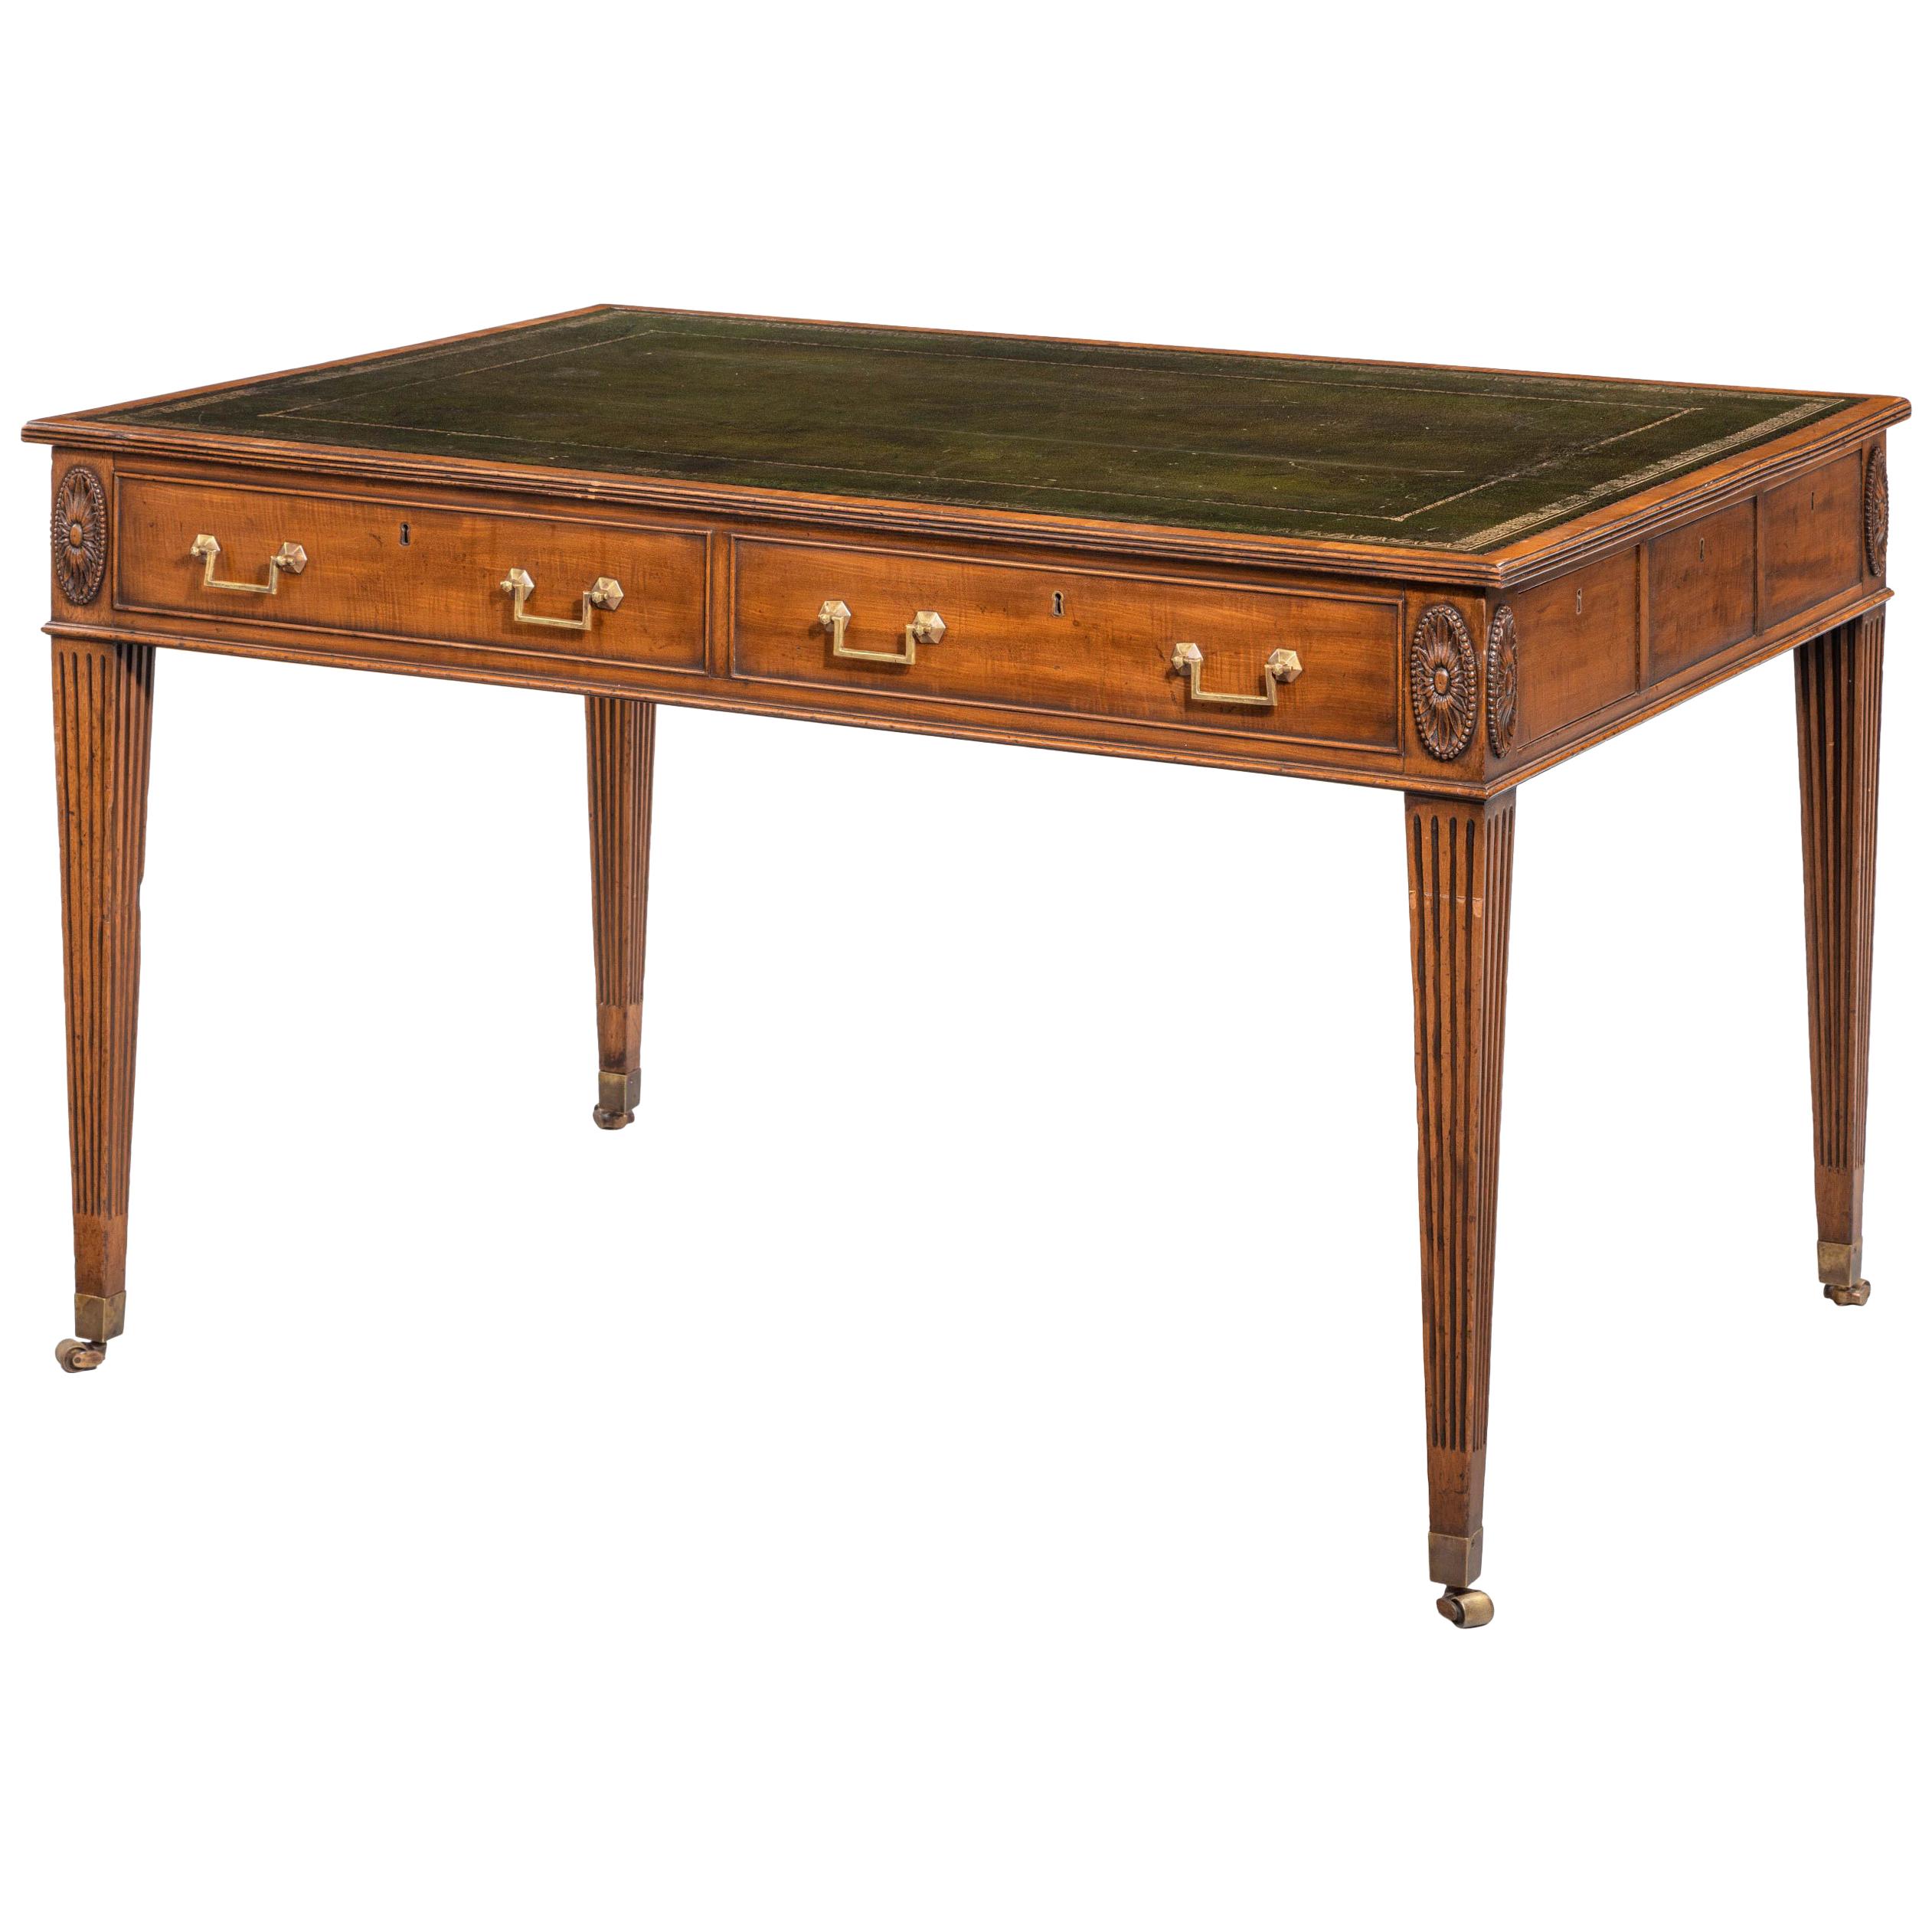 George III Period Mahogany Library Table